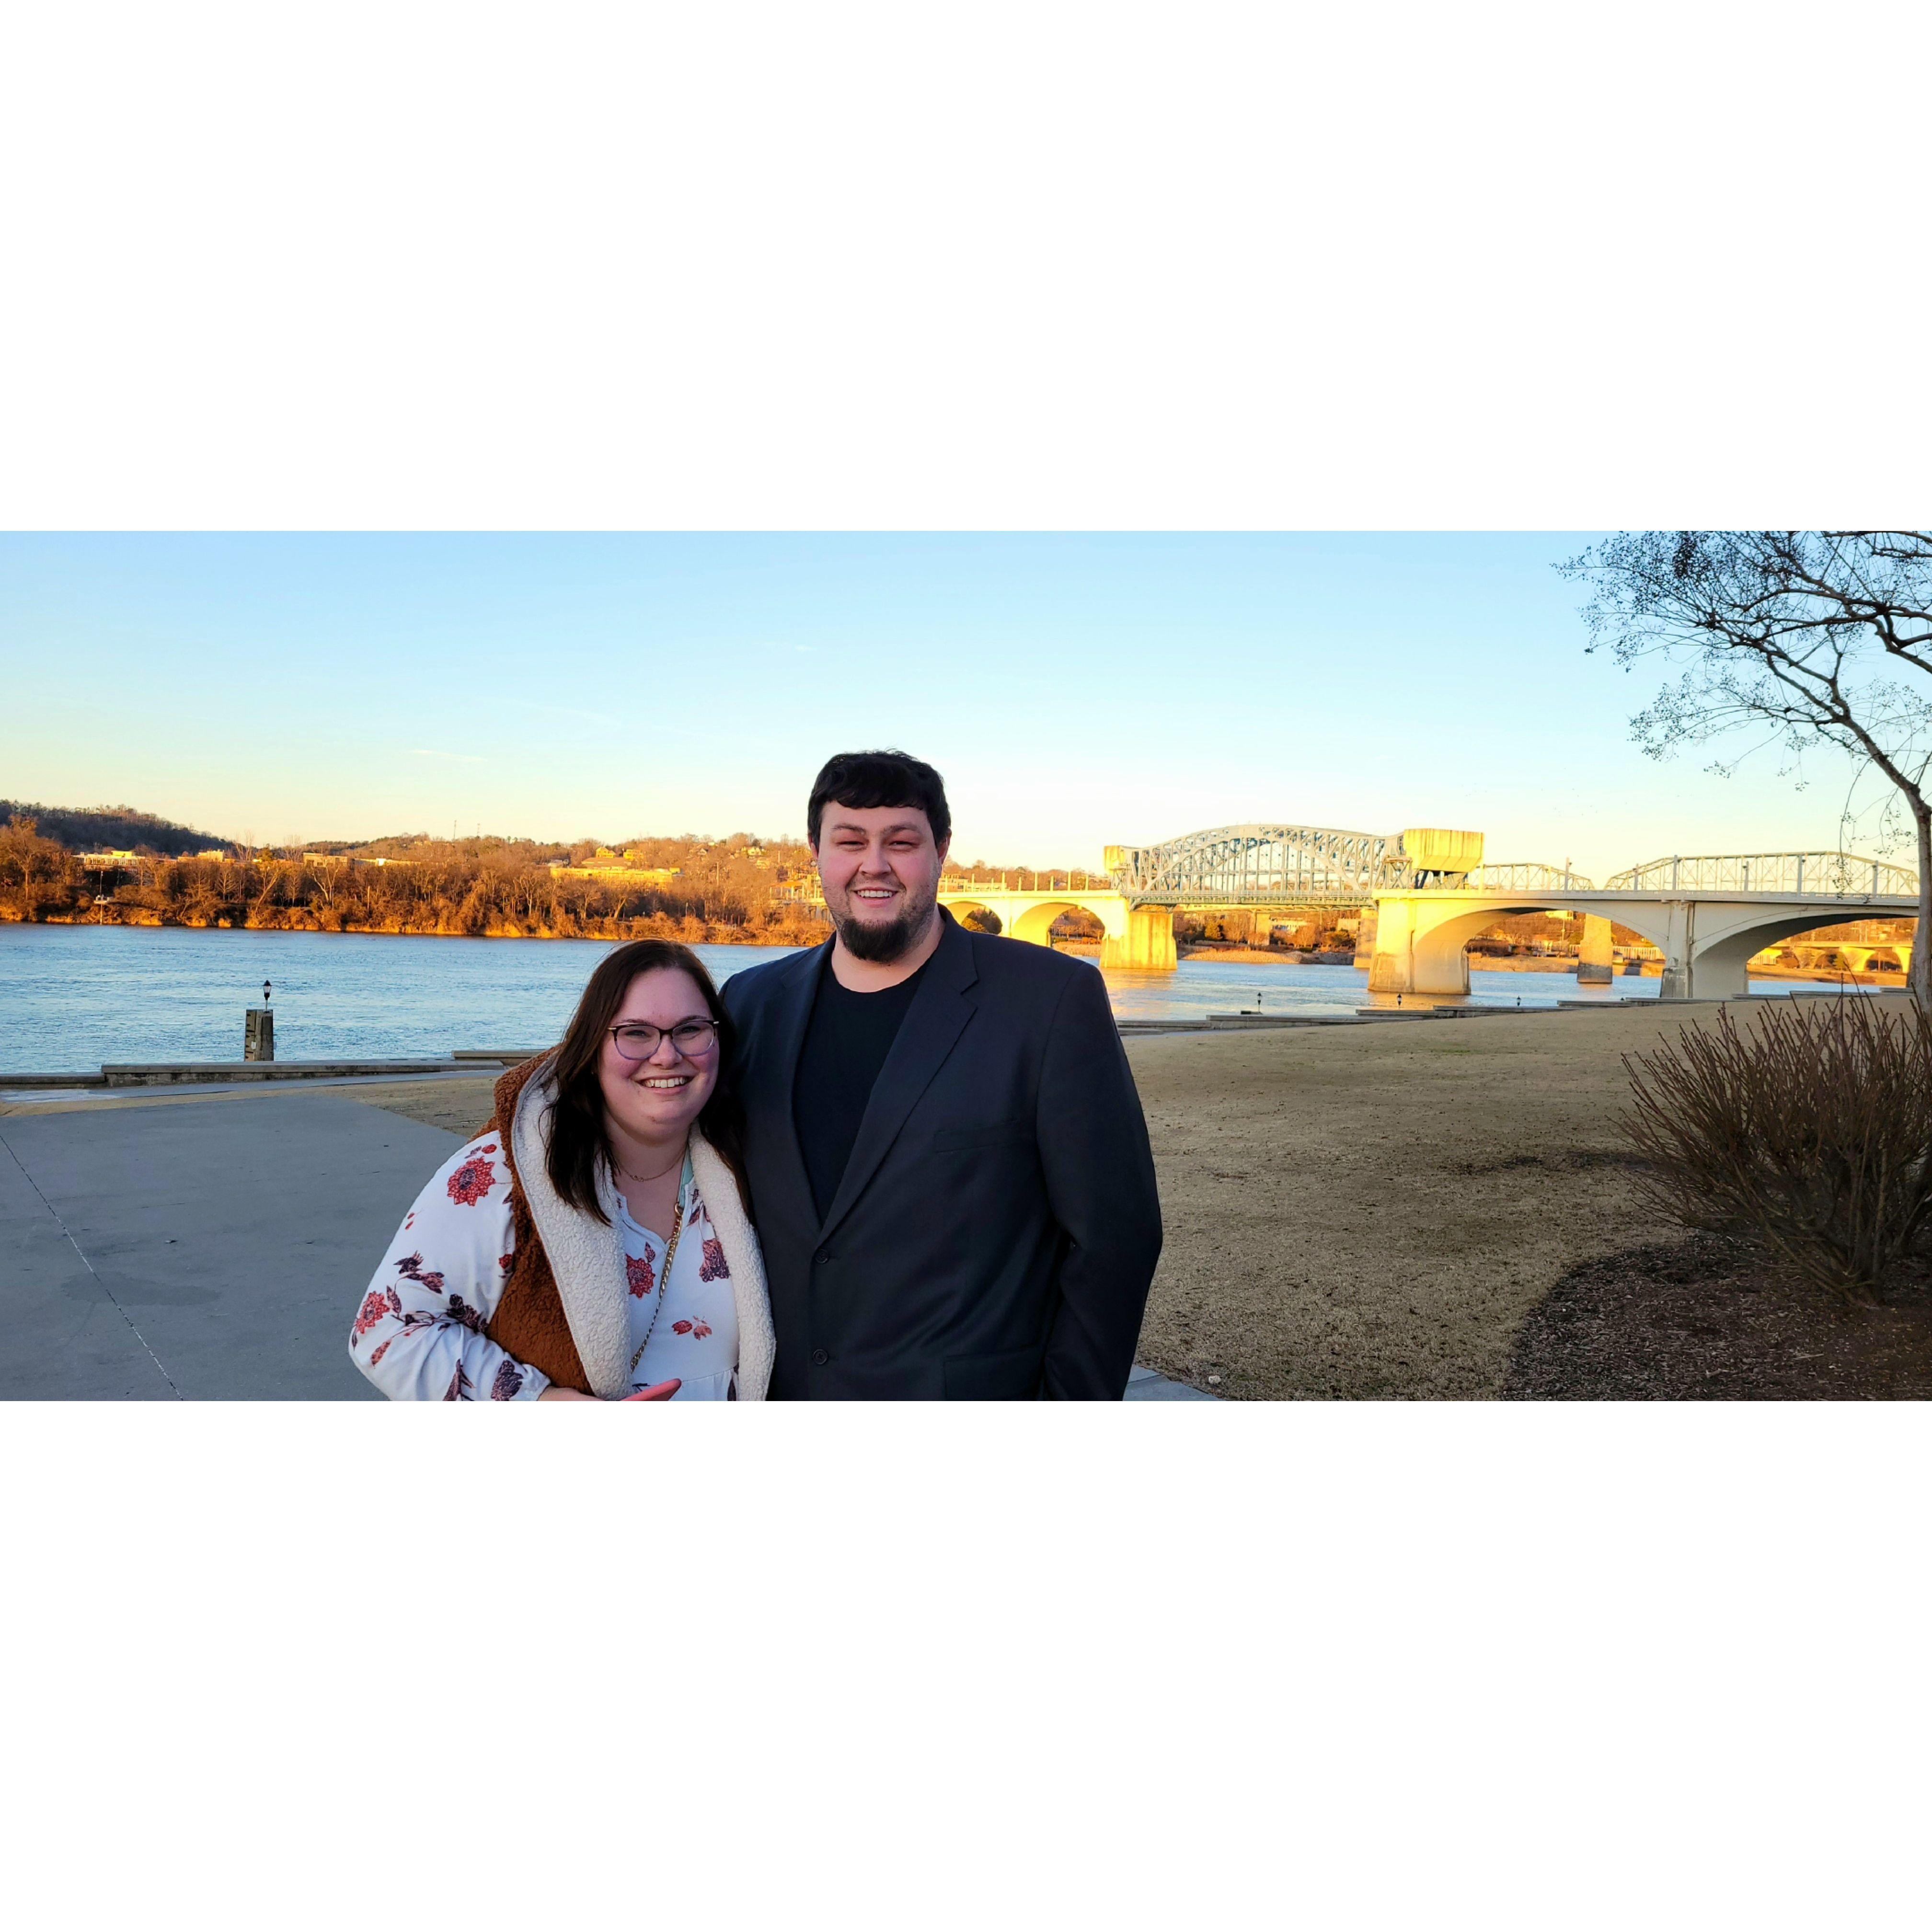 First picture as an engaged couple!!  Rachel is wearing the exact same shirt from our first date.  Tennessee River; Chattanooga, TN